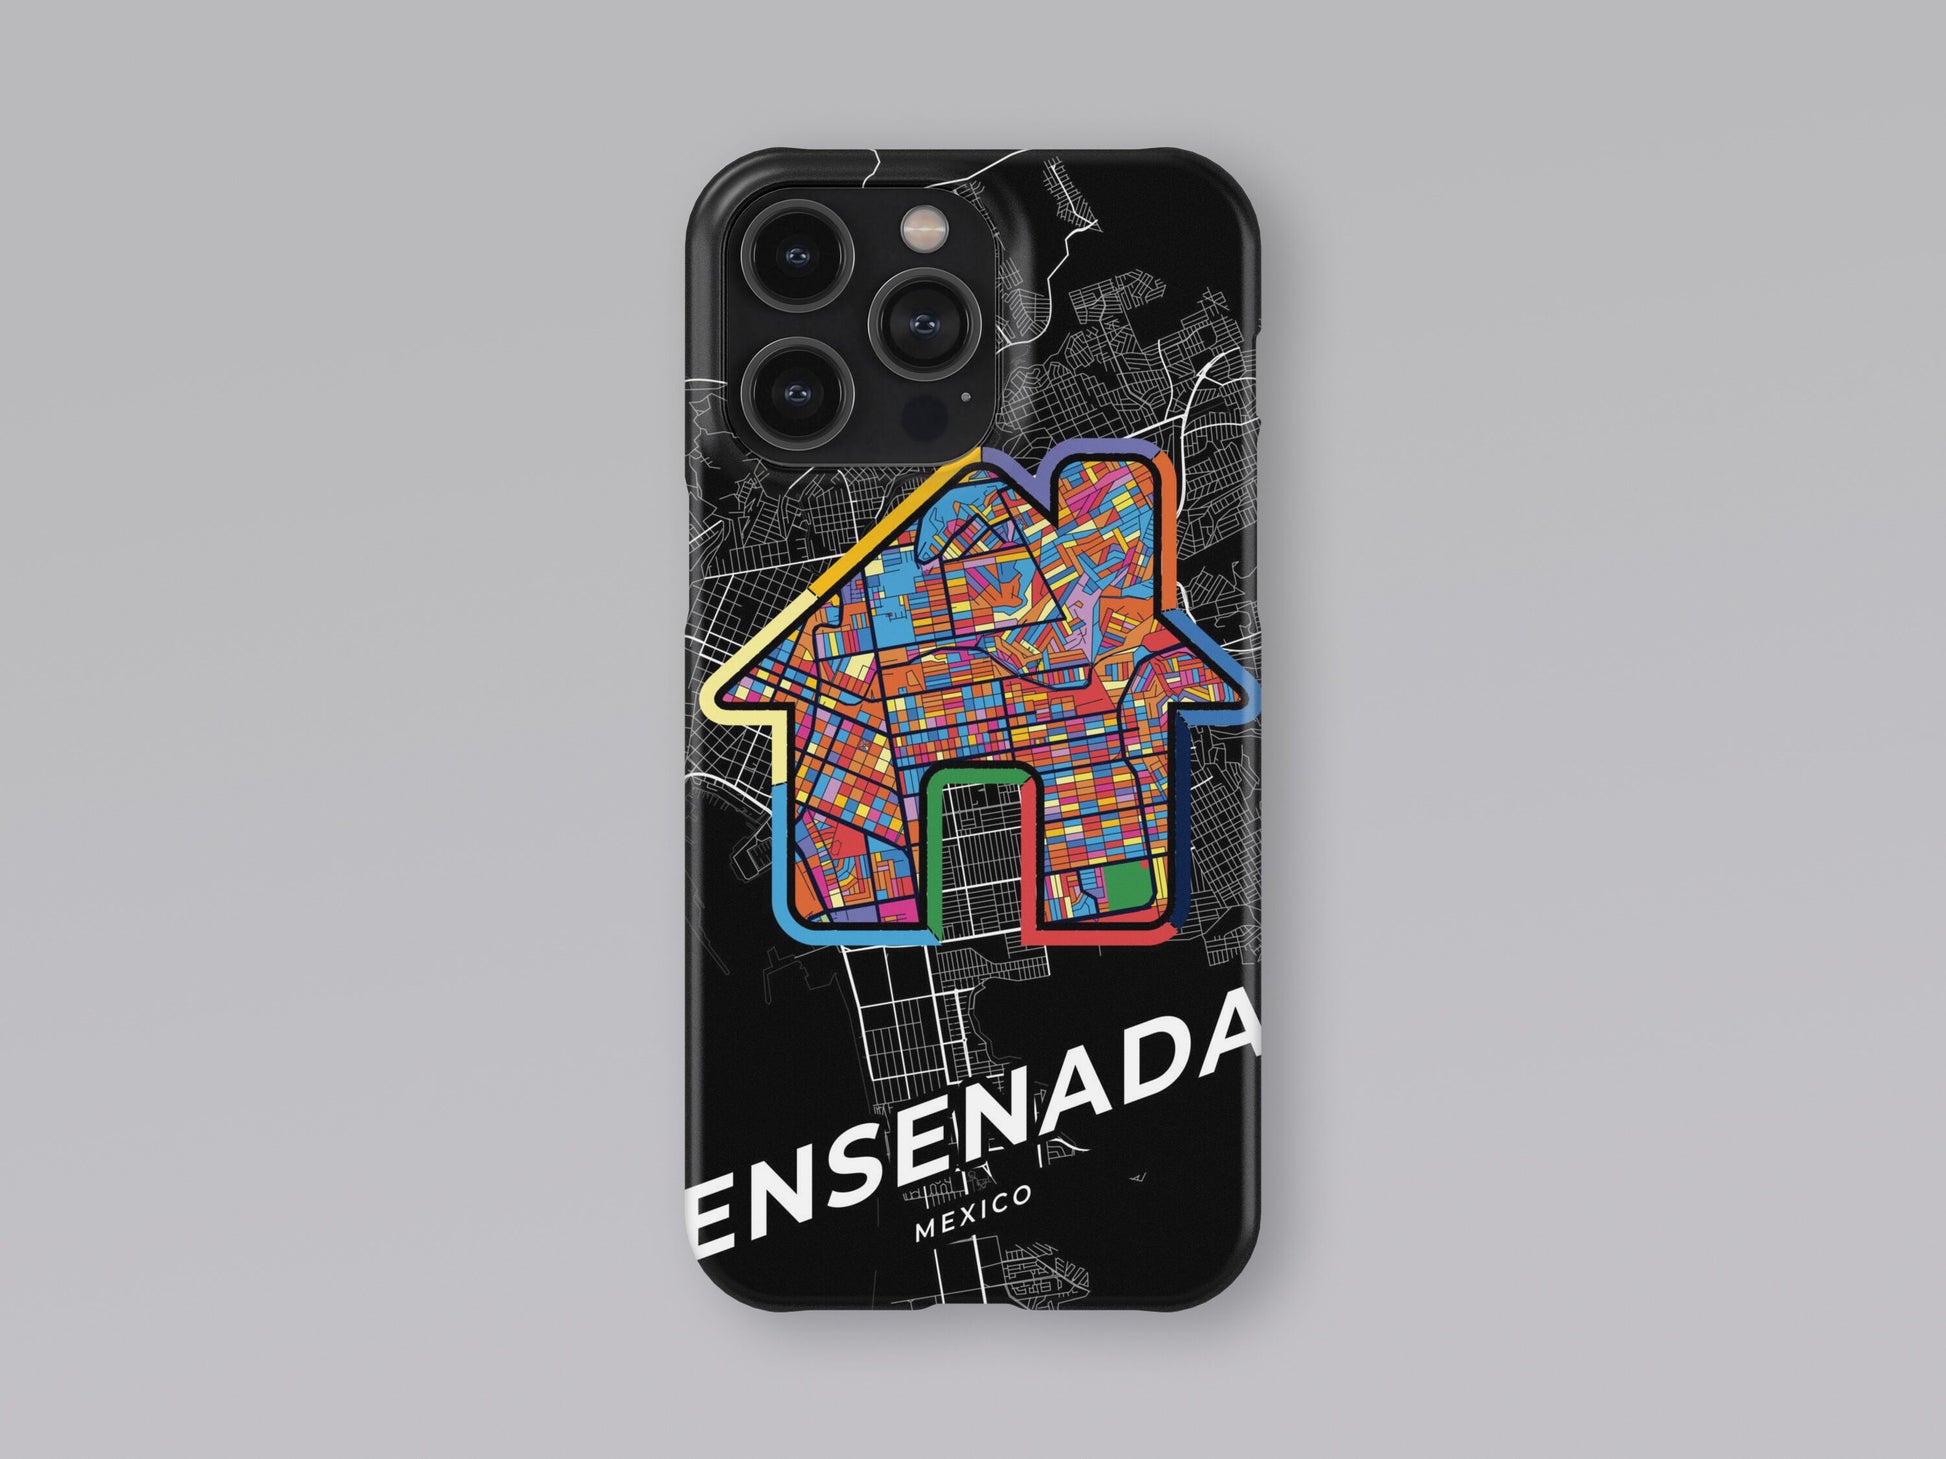 Ensenada Mexico slim phone case with colorful icon. Birthday, wedding or housewarming gift. Couple match cases. 3